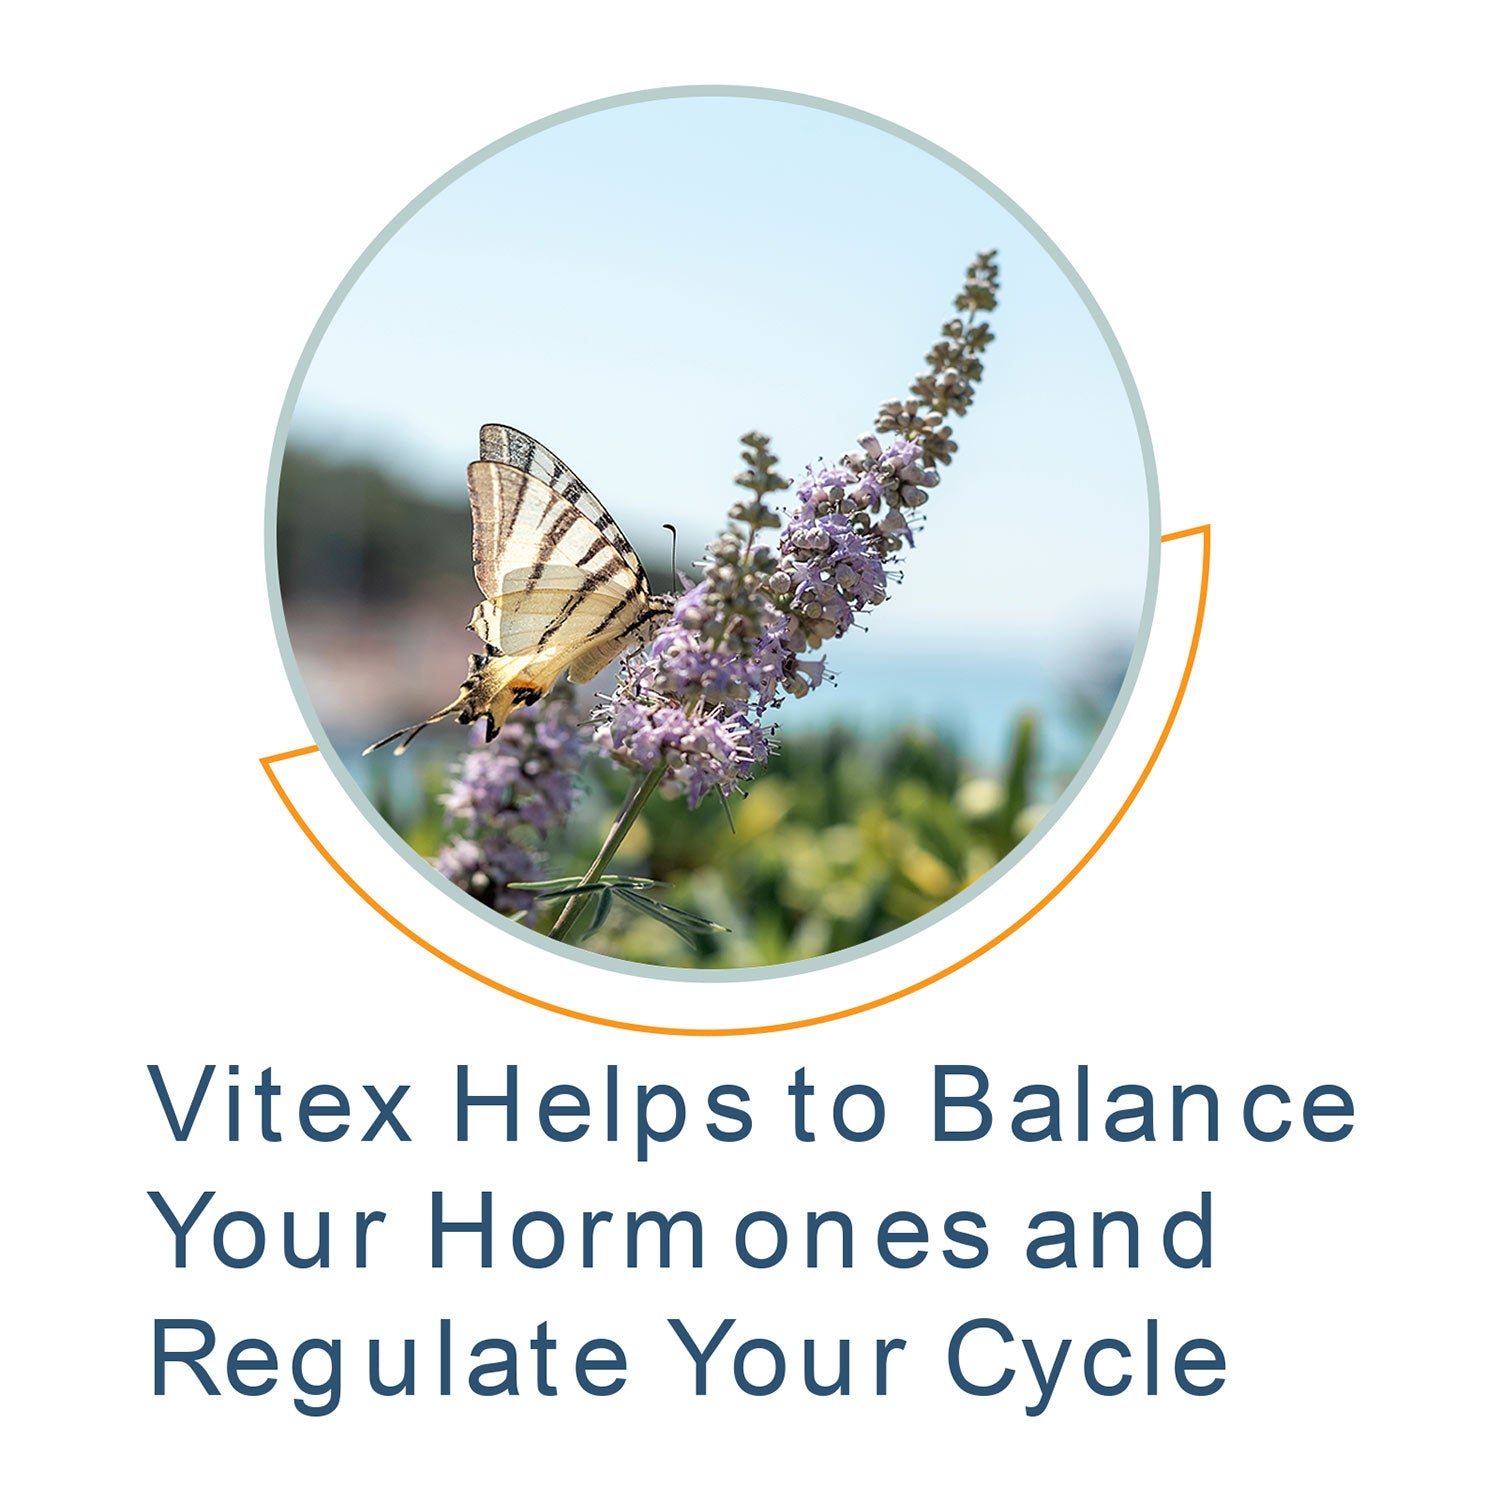 vitex helps to balance your hormones and regulate your cycle